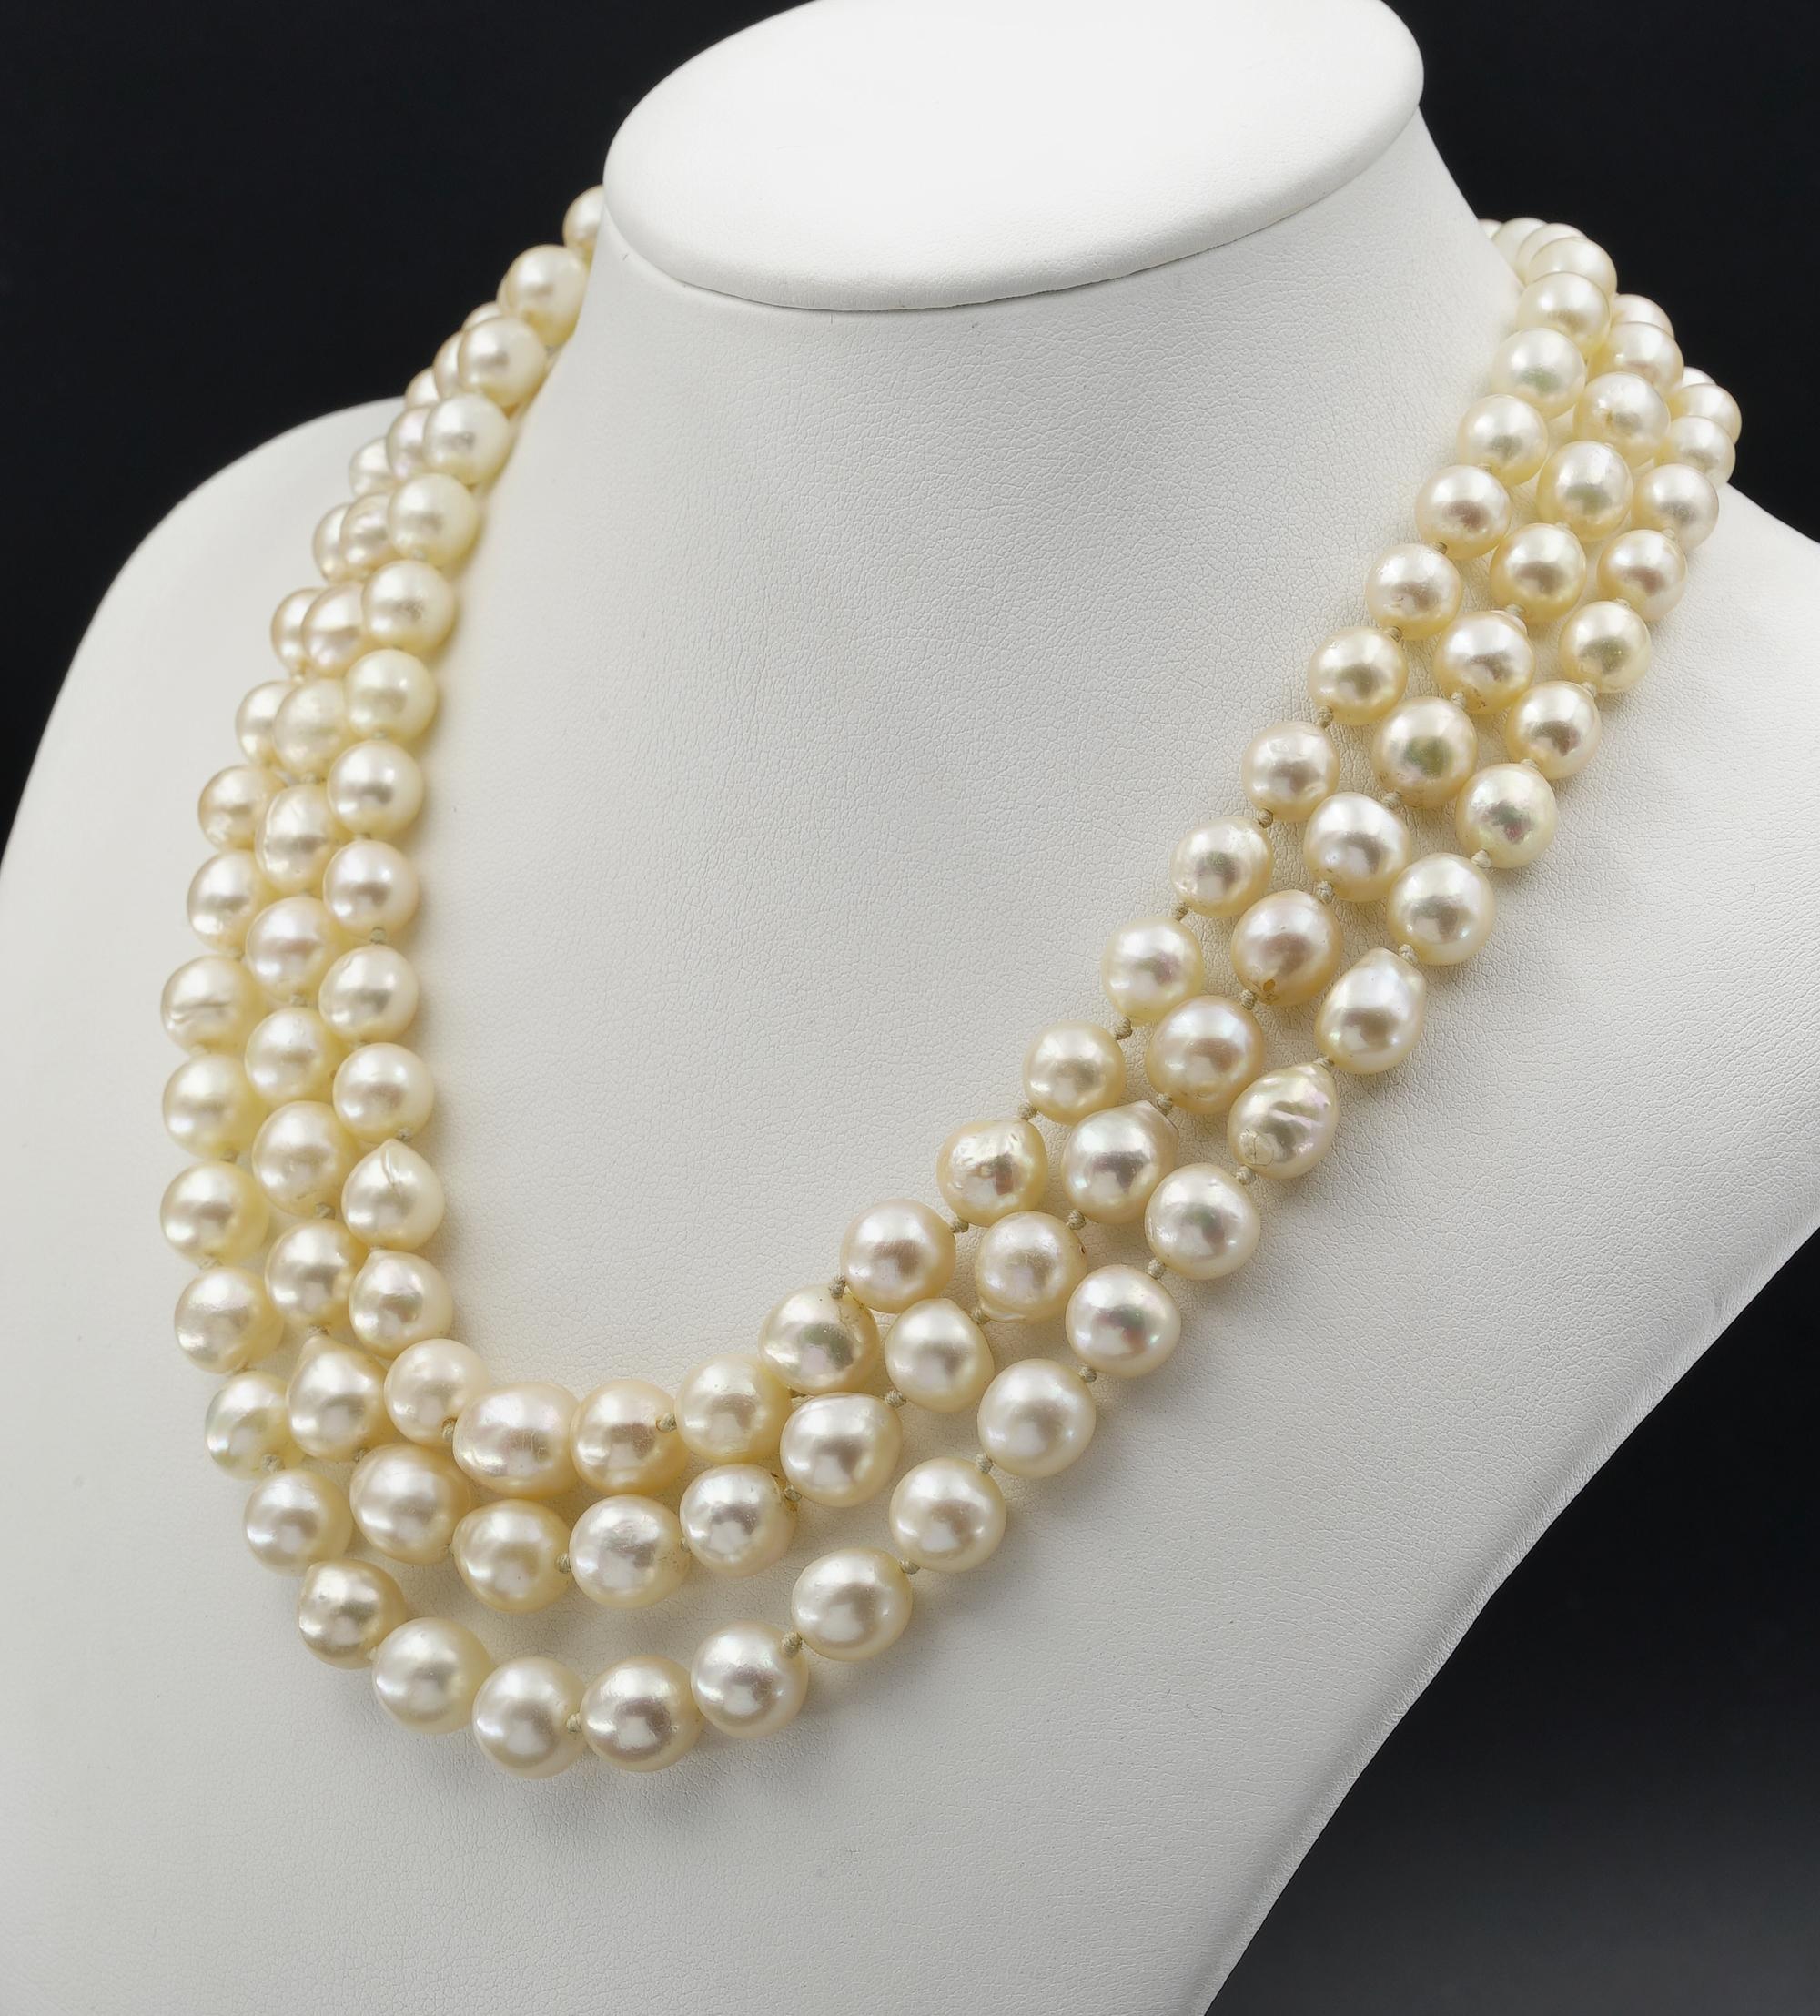 Women's Art Deco Three Strand Baroque Shaped Pearl Necklace Ruby Diamond Large Clasp For Sale